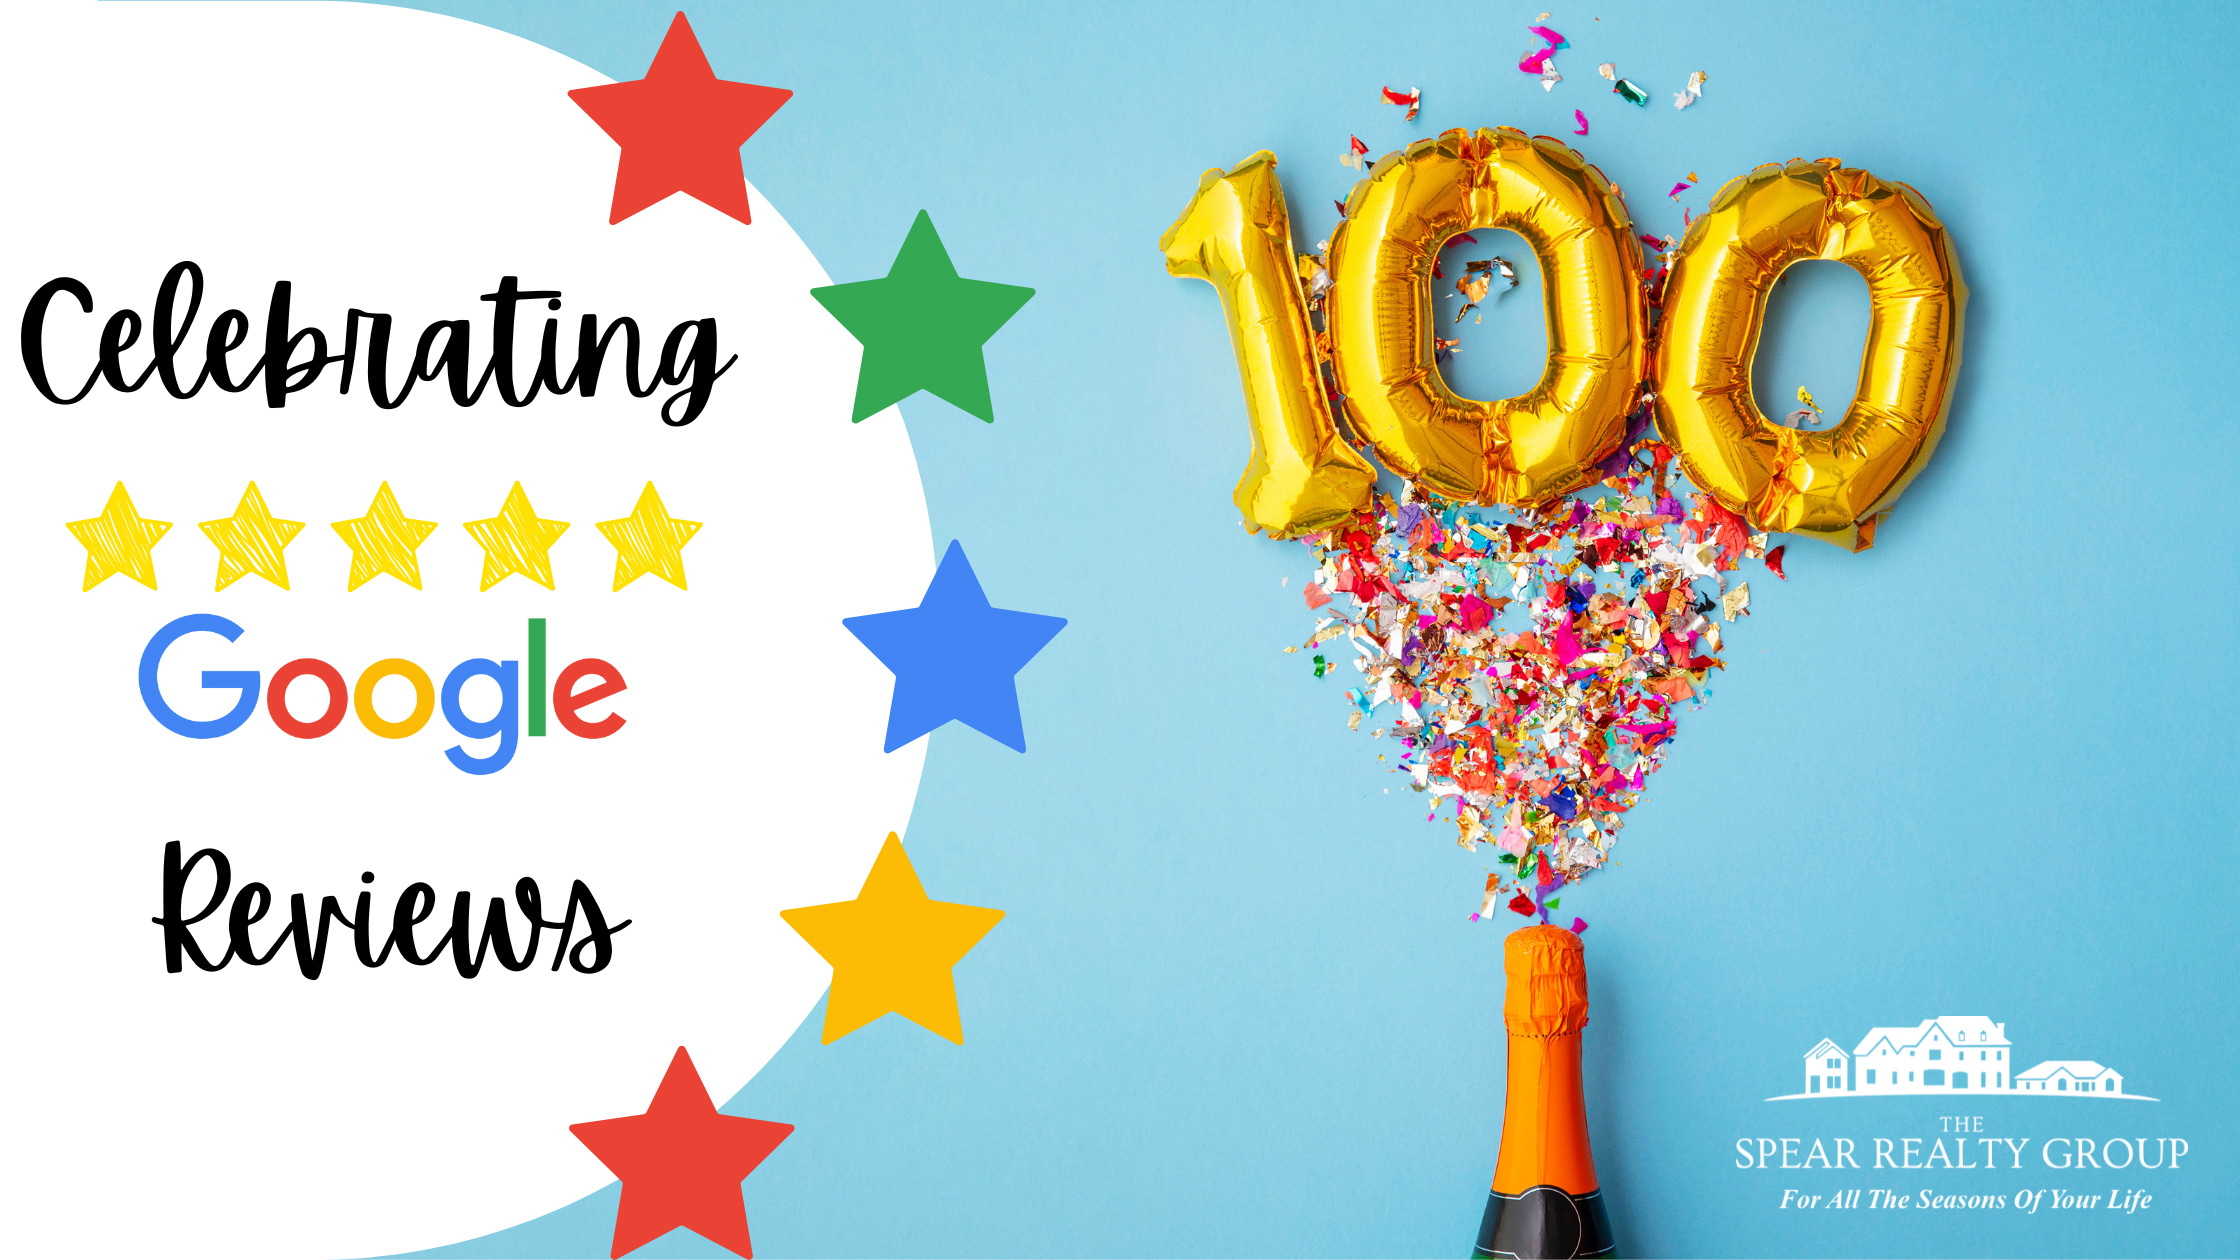 The Spear Realty Group just hit a big milestone- 100 reviews on Google